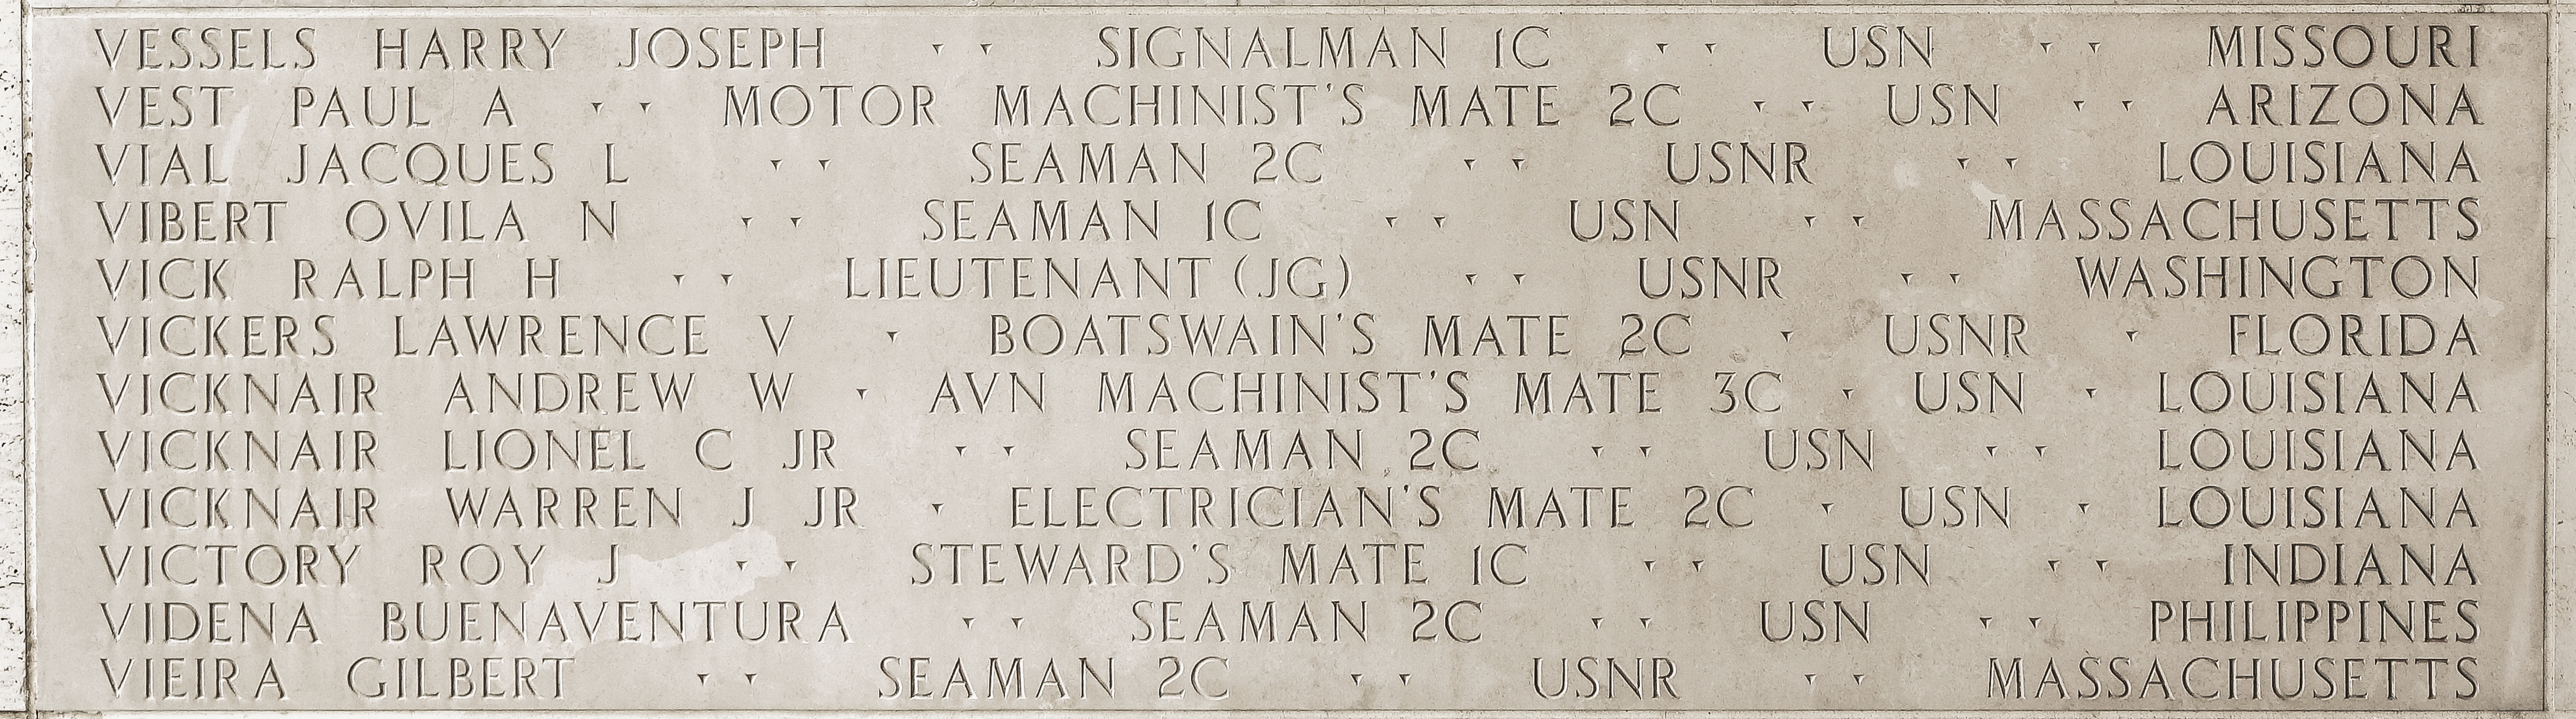 Lawrence V. Vickers, Boatswain's Mate Second Class